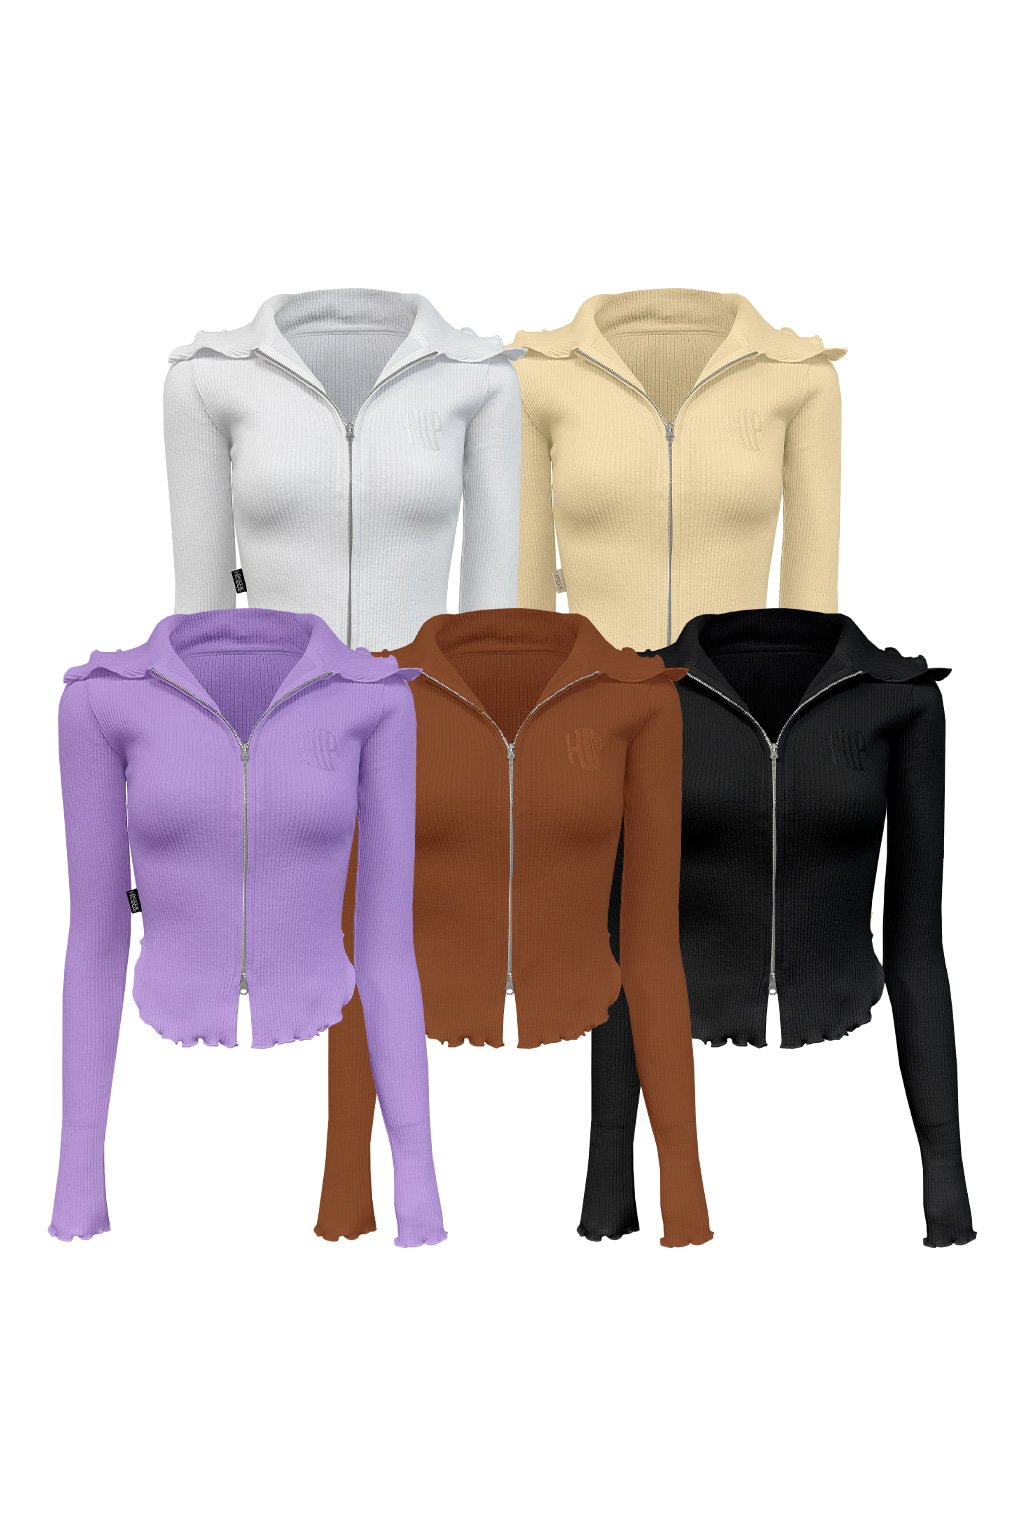 [4+1] Ribbed tension two-way glamorous zip-up.